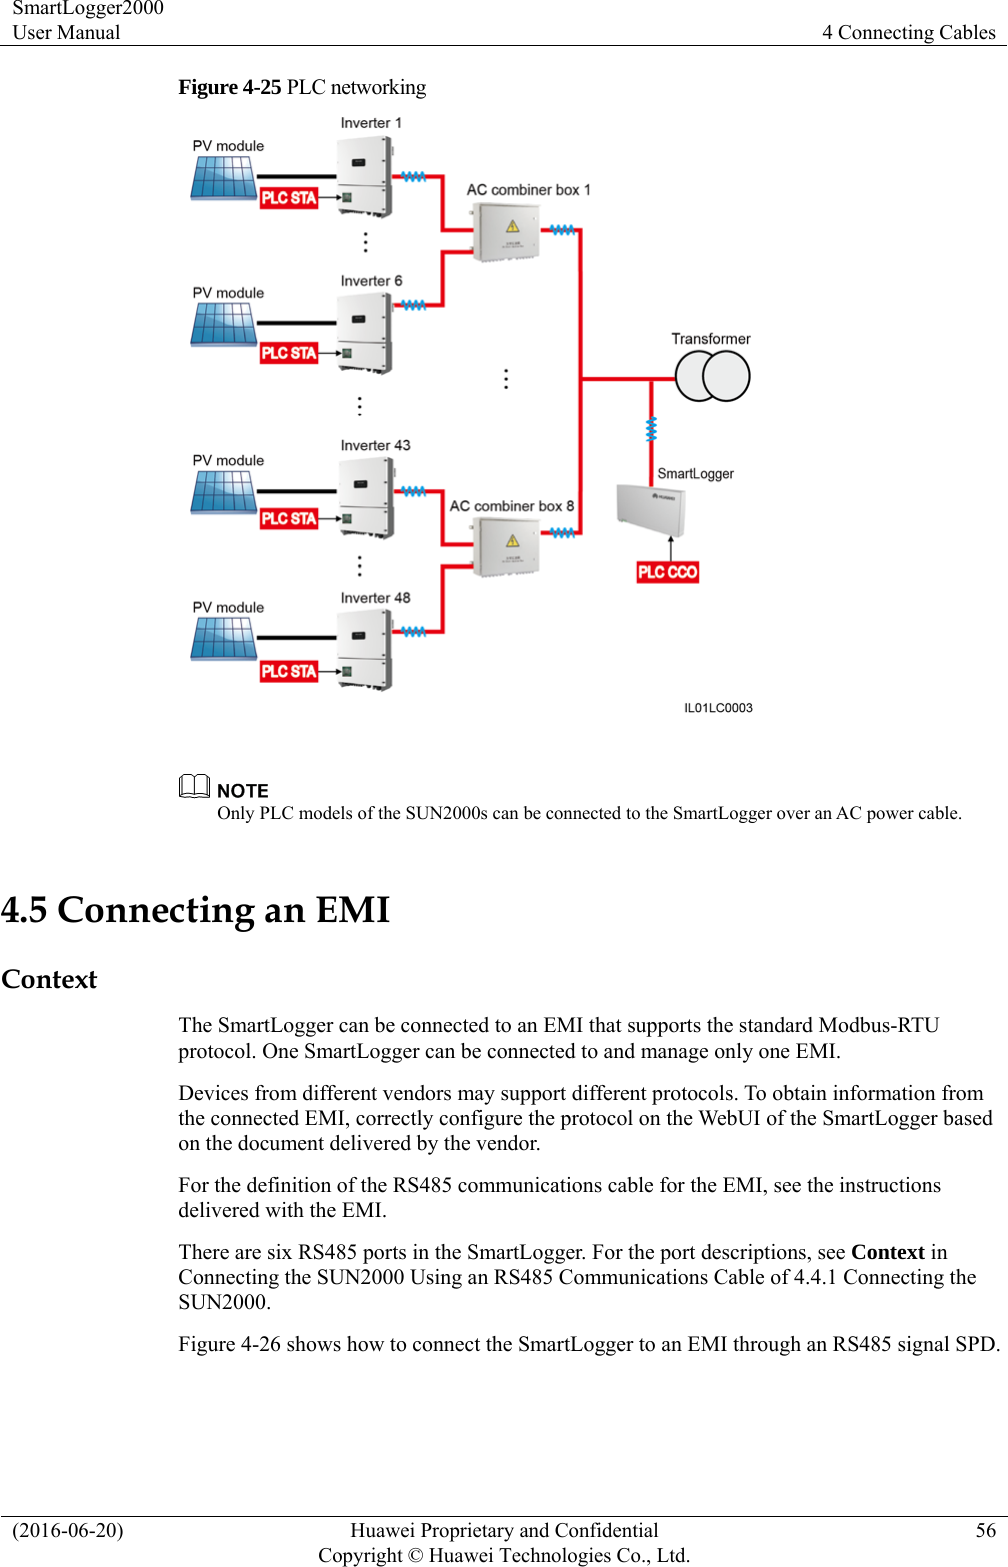 SmartLogger2000 User Manual  4 Connecting Cables (2016-06-20)  Huawei Proprietary and Confidential         Copyright © Huawei Technologies Co., Ltd.56 Figure 4-25 PLC networking    Only PLC models of the SUN2000s can be connected to the SmartLogger over an AC power cable. 4.5 Connecting an EMI Context The SmartLogger can be connected to an EMI that supports the standard Modbus-RTU protocol. One SmartLogger can be connected to and manage only one EMI.   Devices from different vendors may support different protocols. To obtain information from the connected EMI, correctly configure the protocol on the WebUI of the SmartLogger based on the document delivered by the vendor.   For the definition of the RS485 communications cable for the EMI, see the instructions delivered with the EMI. There are six RS485 ports in the SmartLogger. For the port descriptions, see Context in Connecting the SUN2000 Using an RS485 Communications Cable of 4.4.1 Connecting the SUN2000. Figure 4-26 shows how to connect the SmartLogger to an EMI through an RS485 signal SPD. 